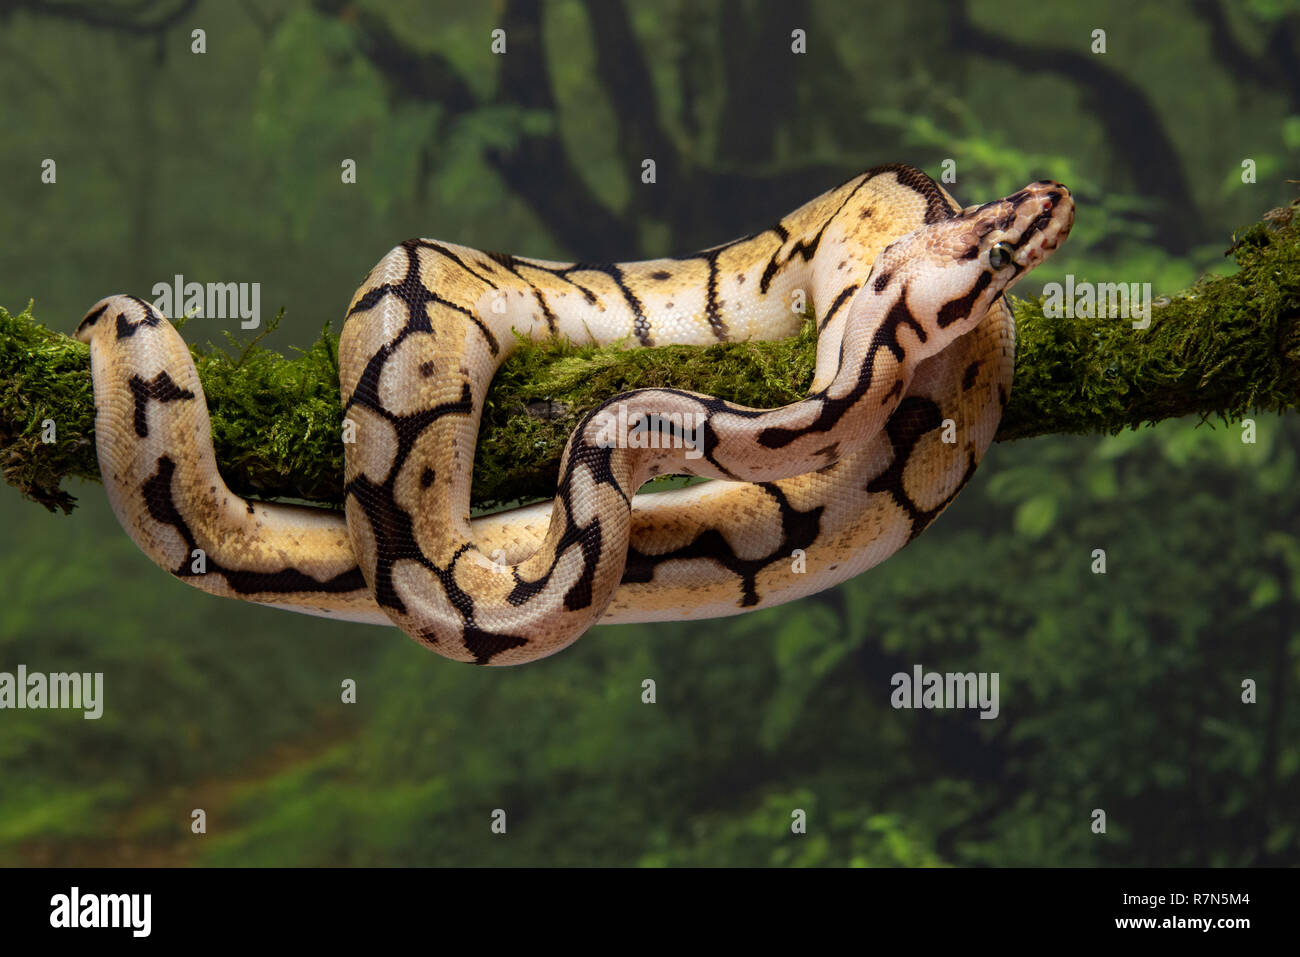 Close up of a bumble bee royal python coiled around a lichen covered branch Stock Photo